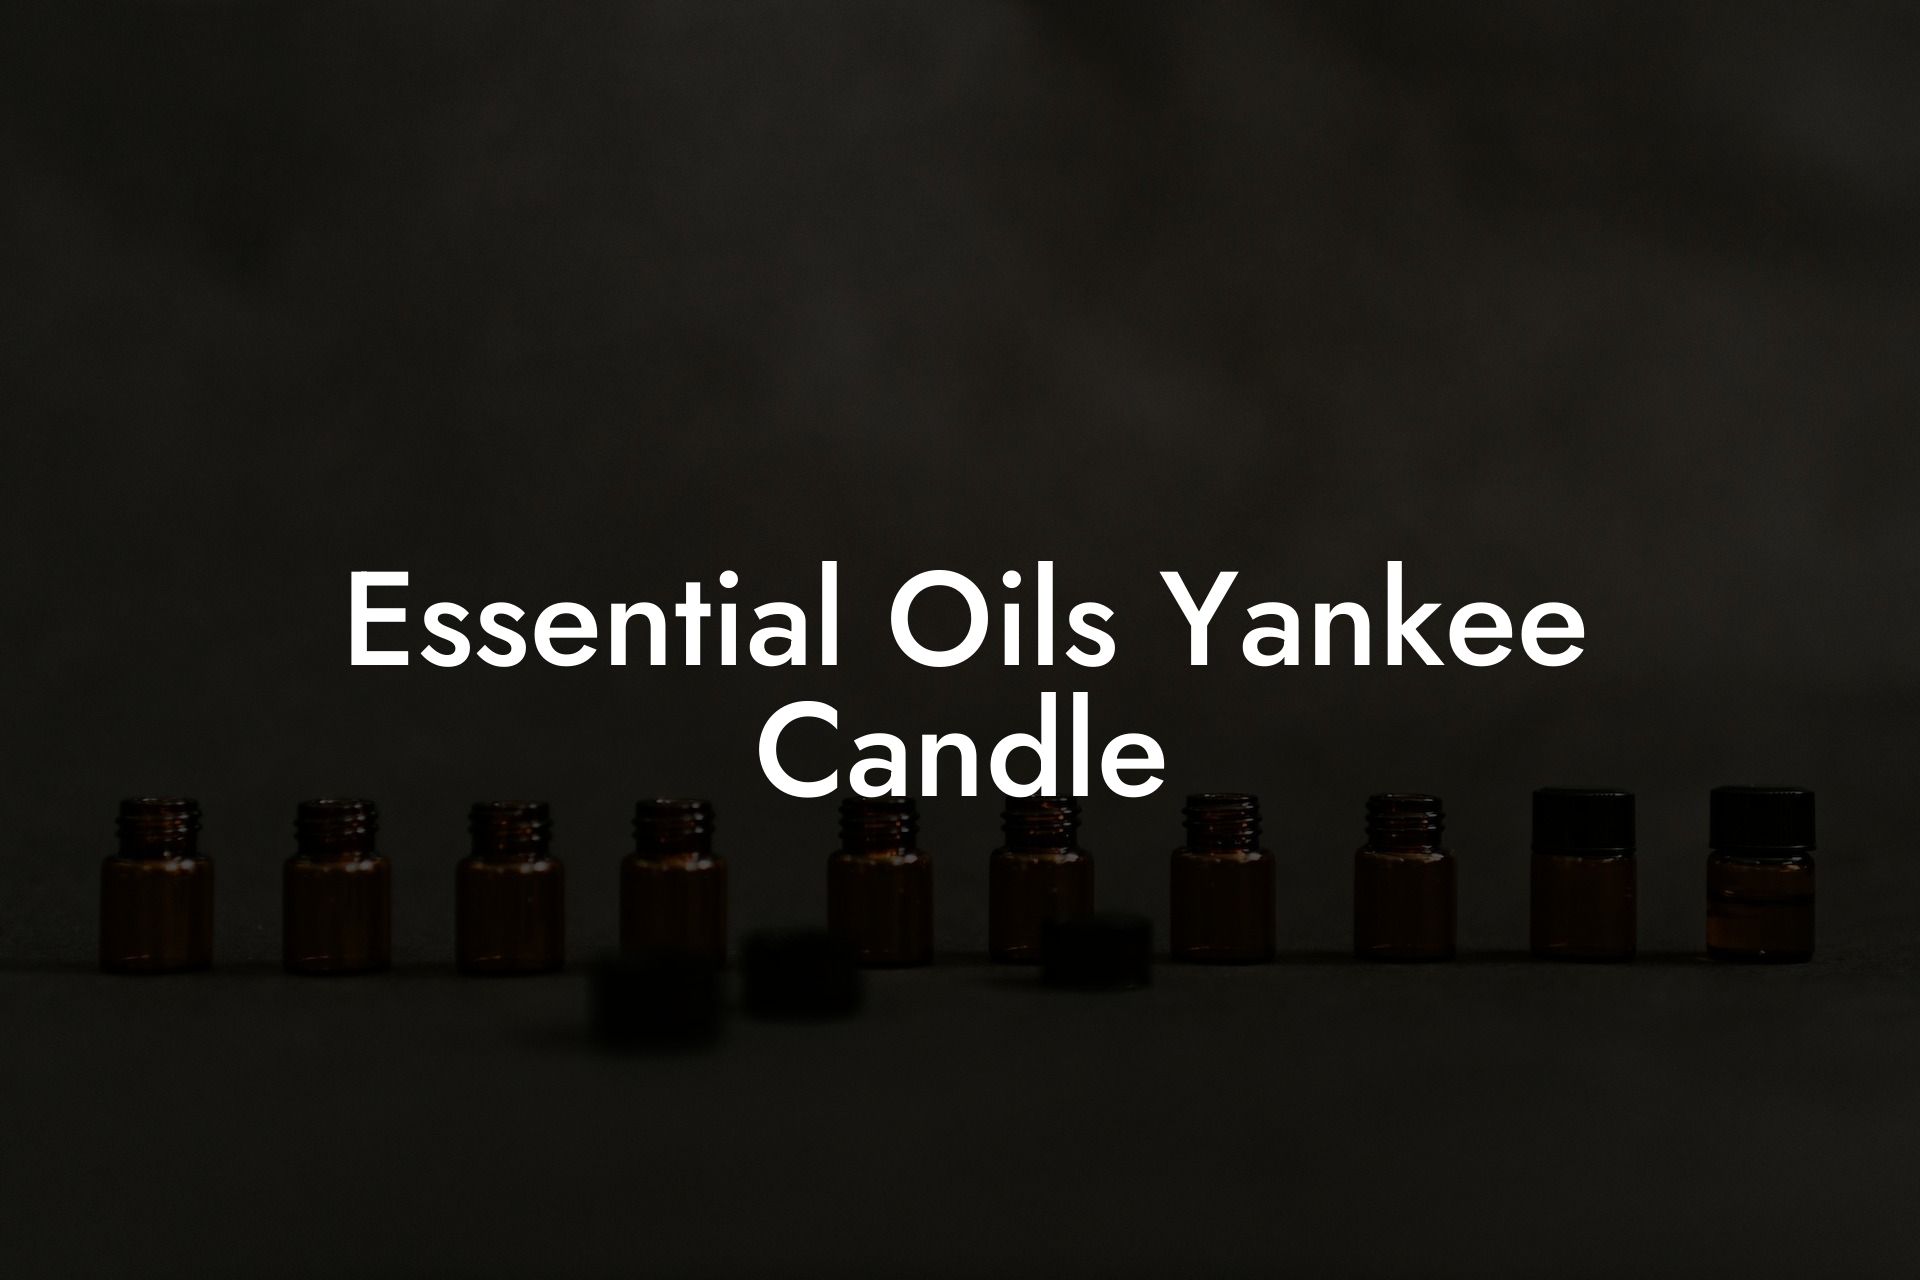 Essential Oils Yankee Candle